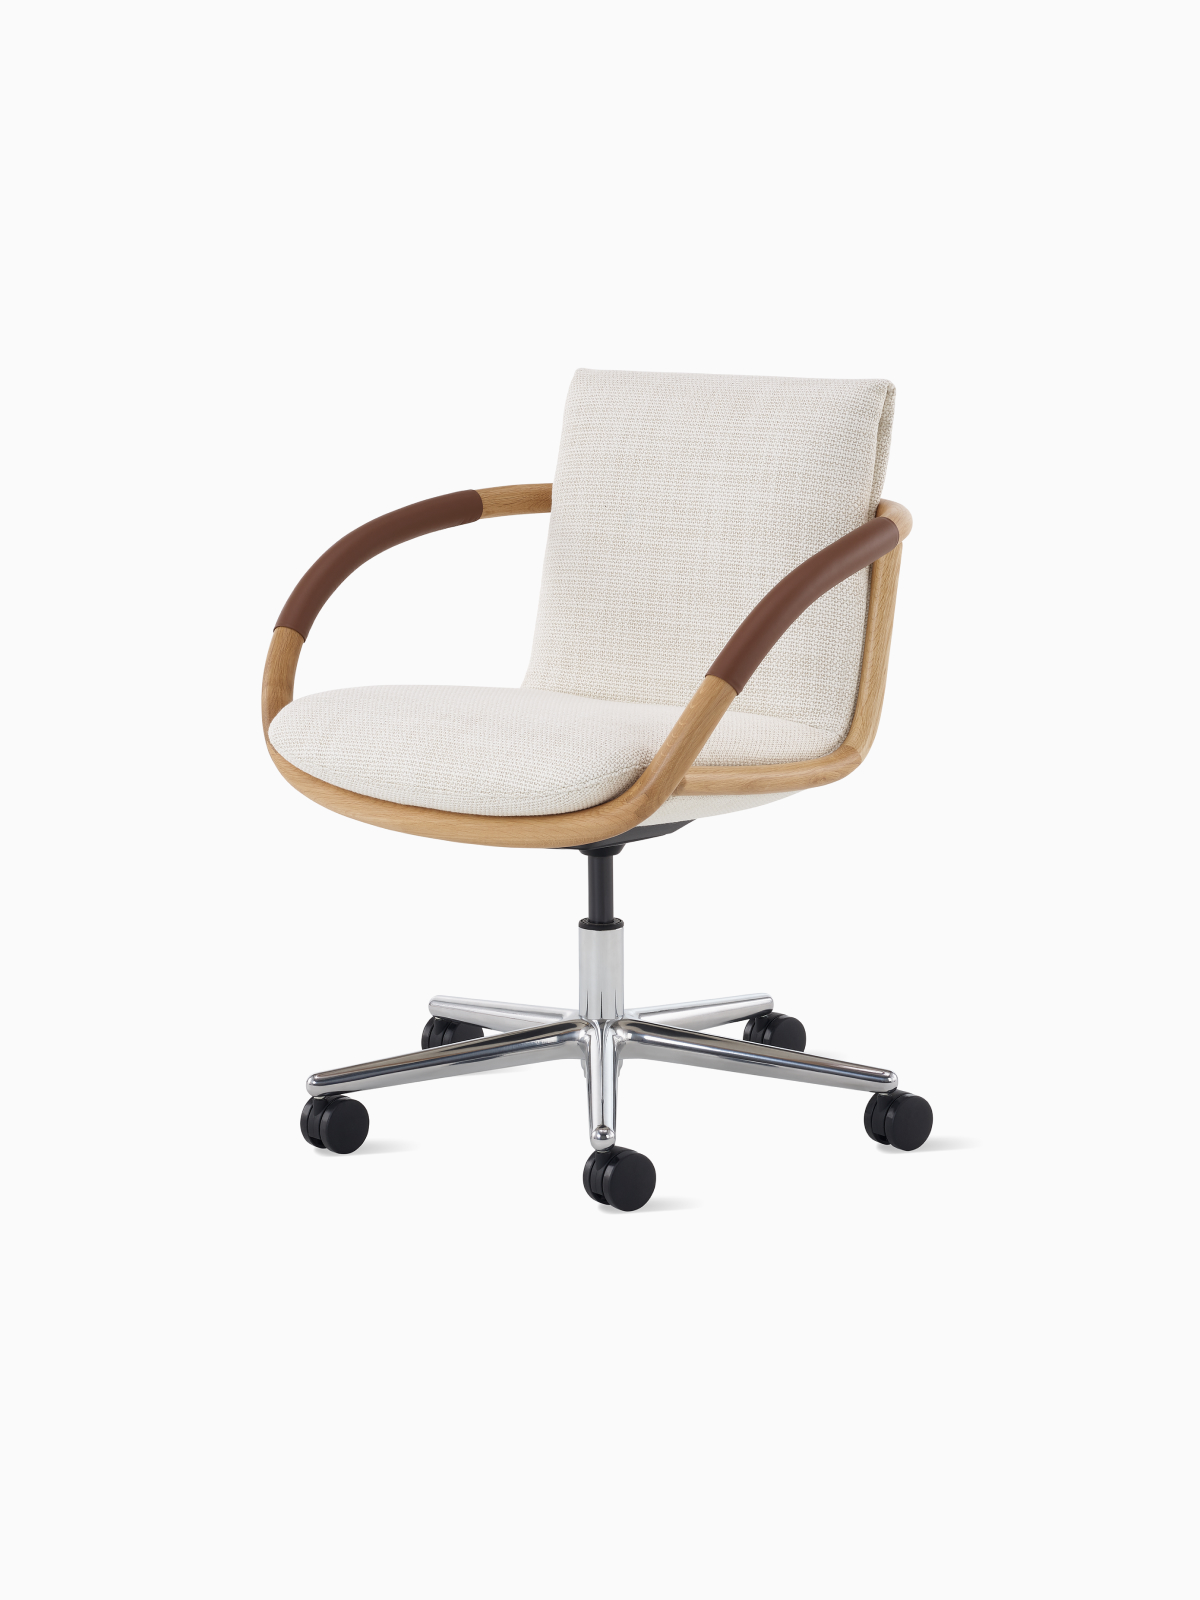 https://www.hermanmiller.com/content/dam/hmicom/page_assets/products/full_loop_chair/th_prd_full_loop_chair_office_seating_hv.jpg